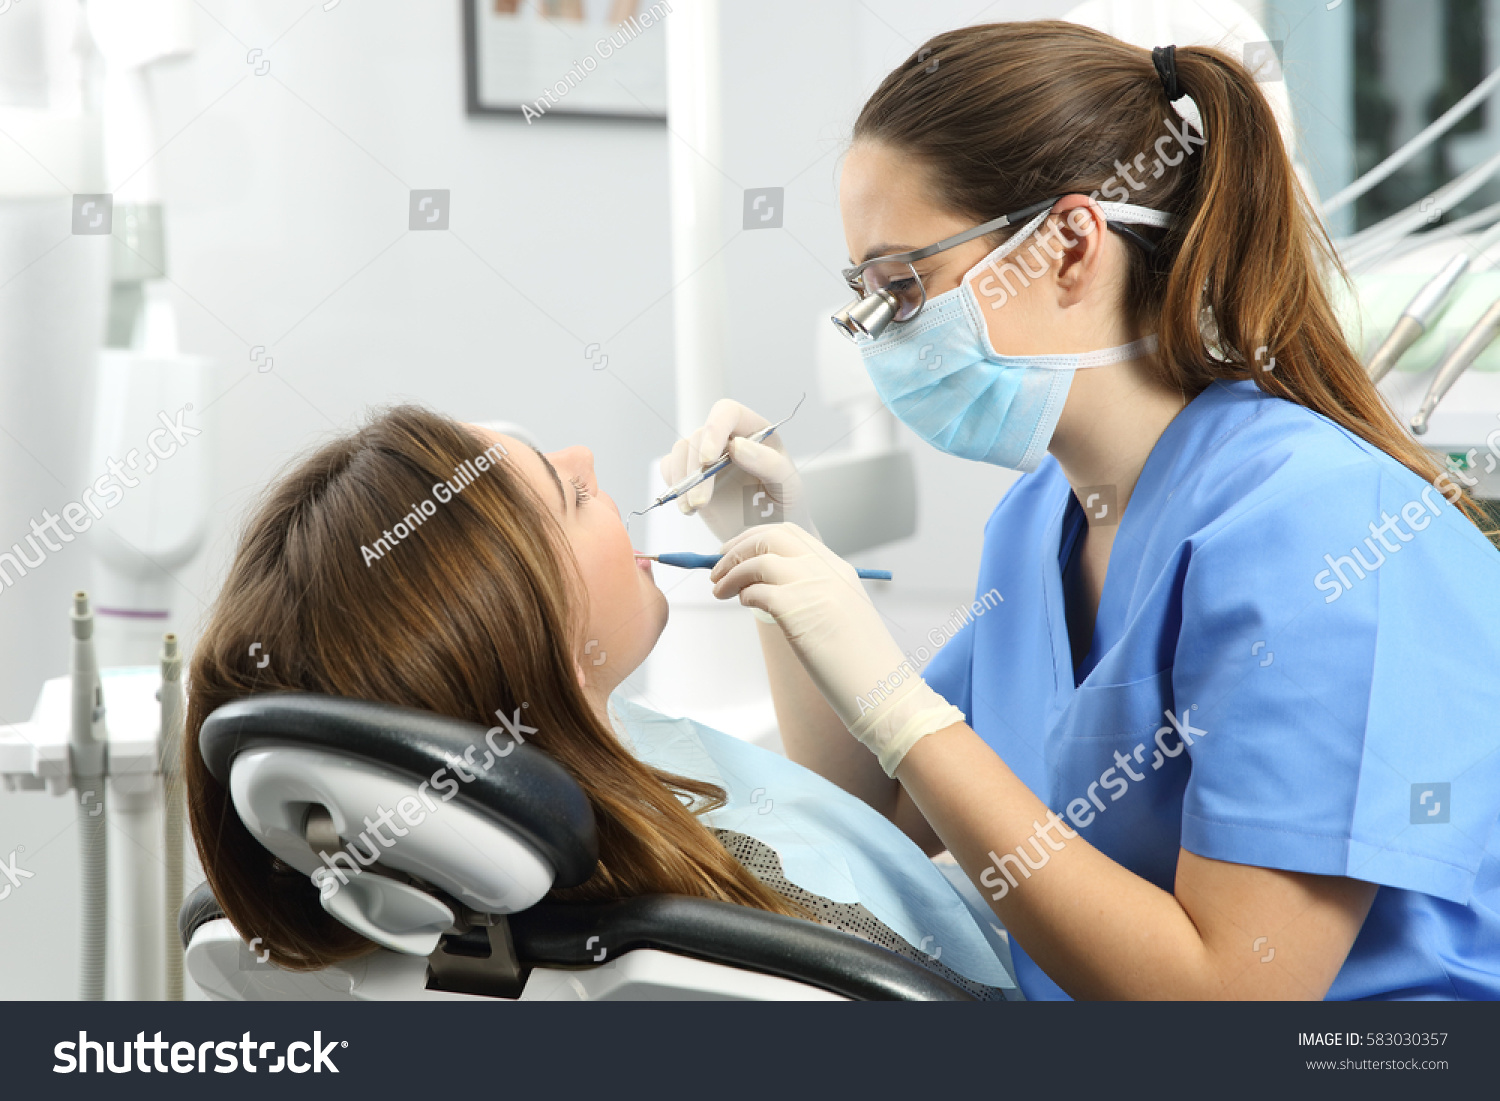 Dentist wearing eyeglasses gloves and mask examining a patient teeth with a dental probe and a mirror in a clinic box with equipment in the background #583030357